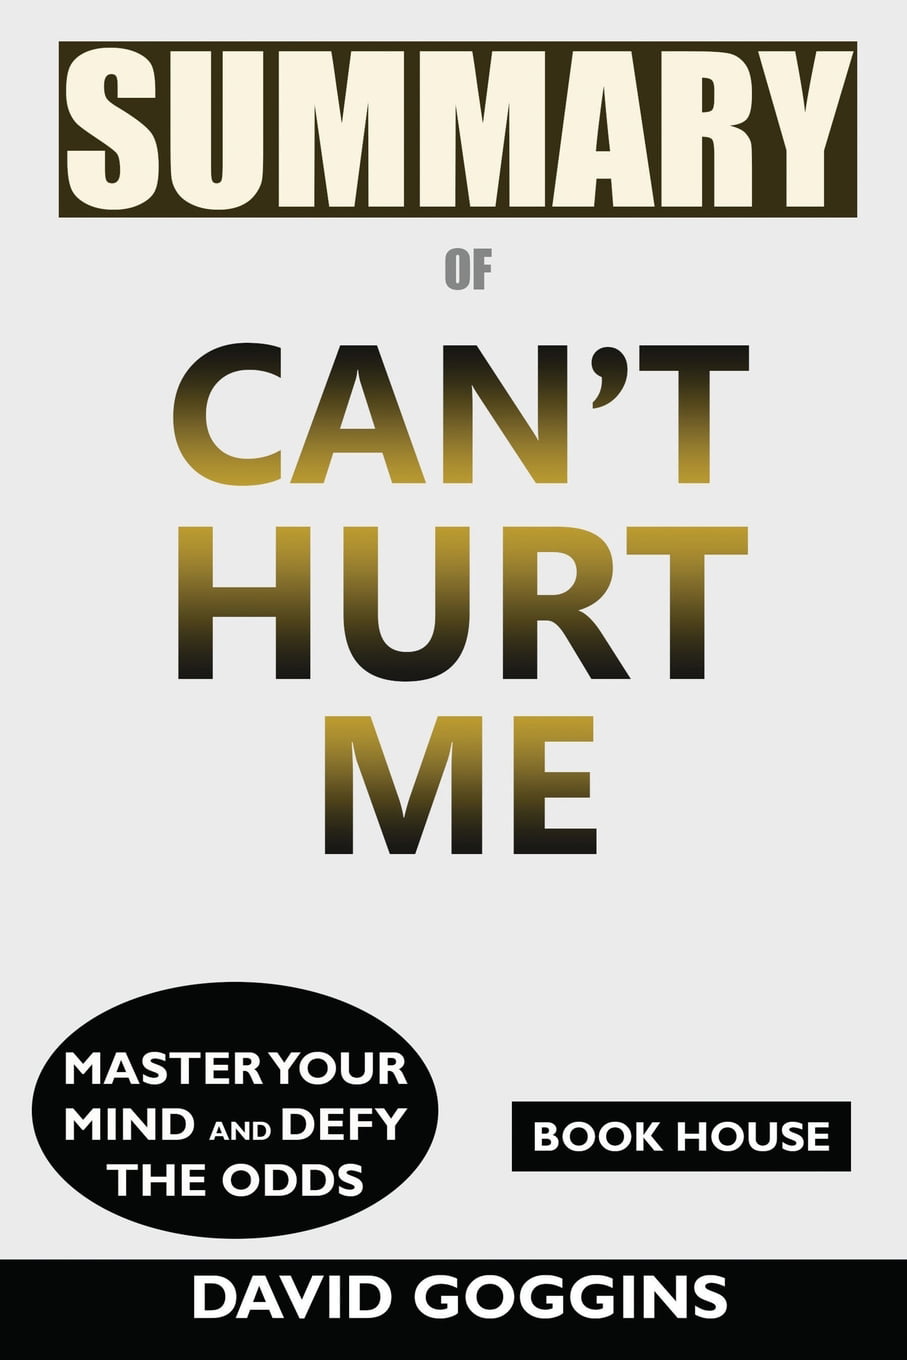 Can't Hurt Me: Master Your Mind And Defy The Odds (Hardcover) by